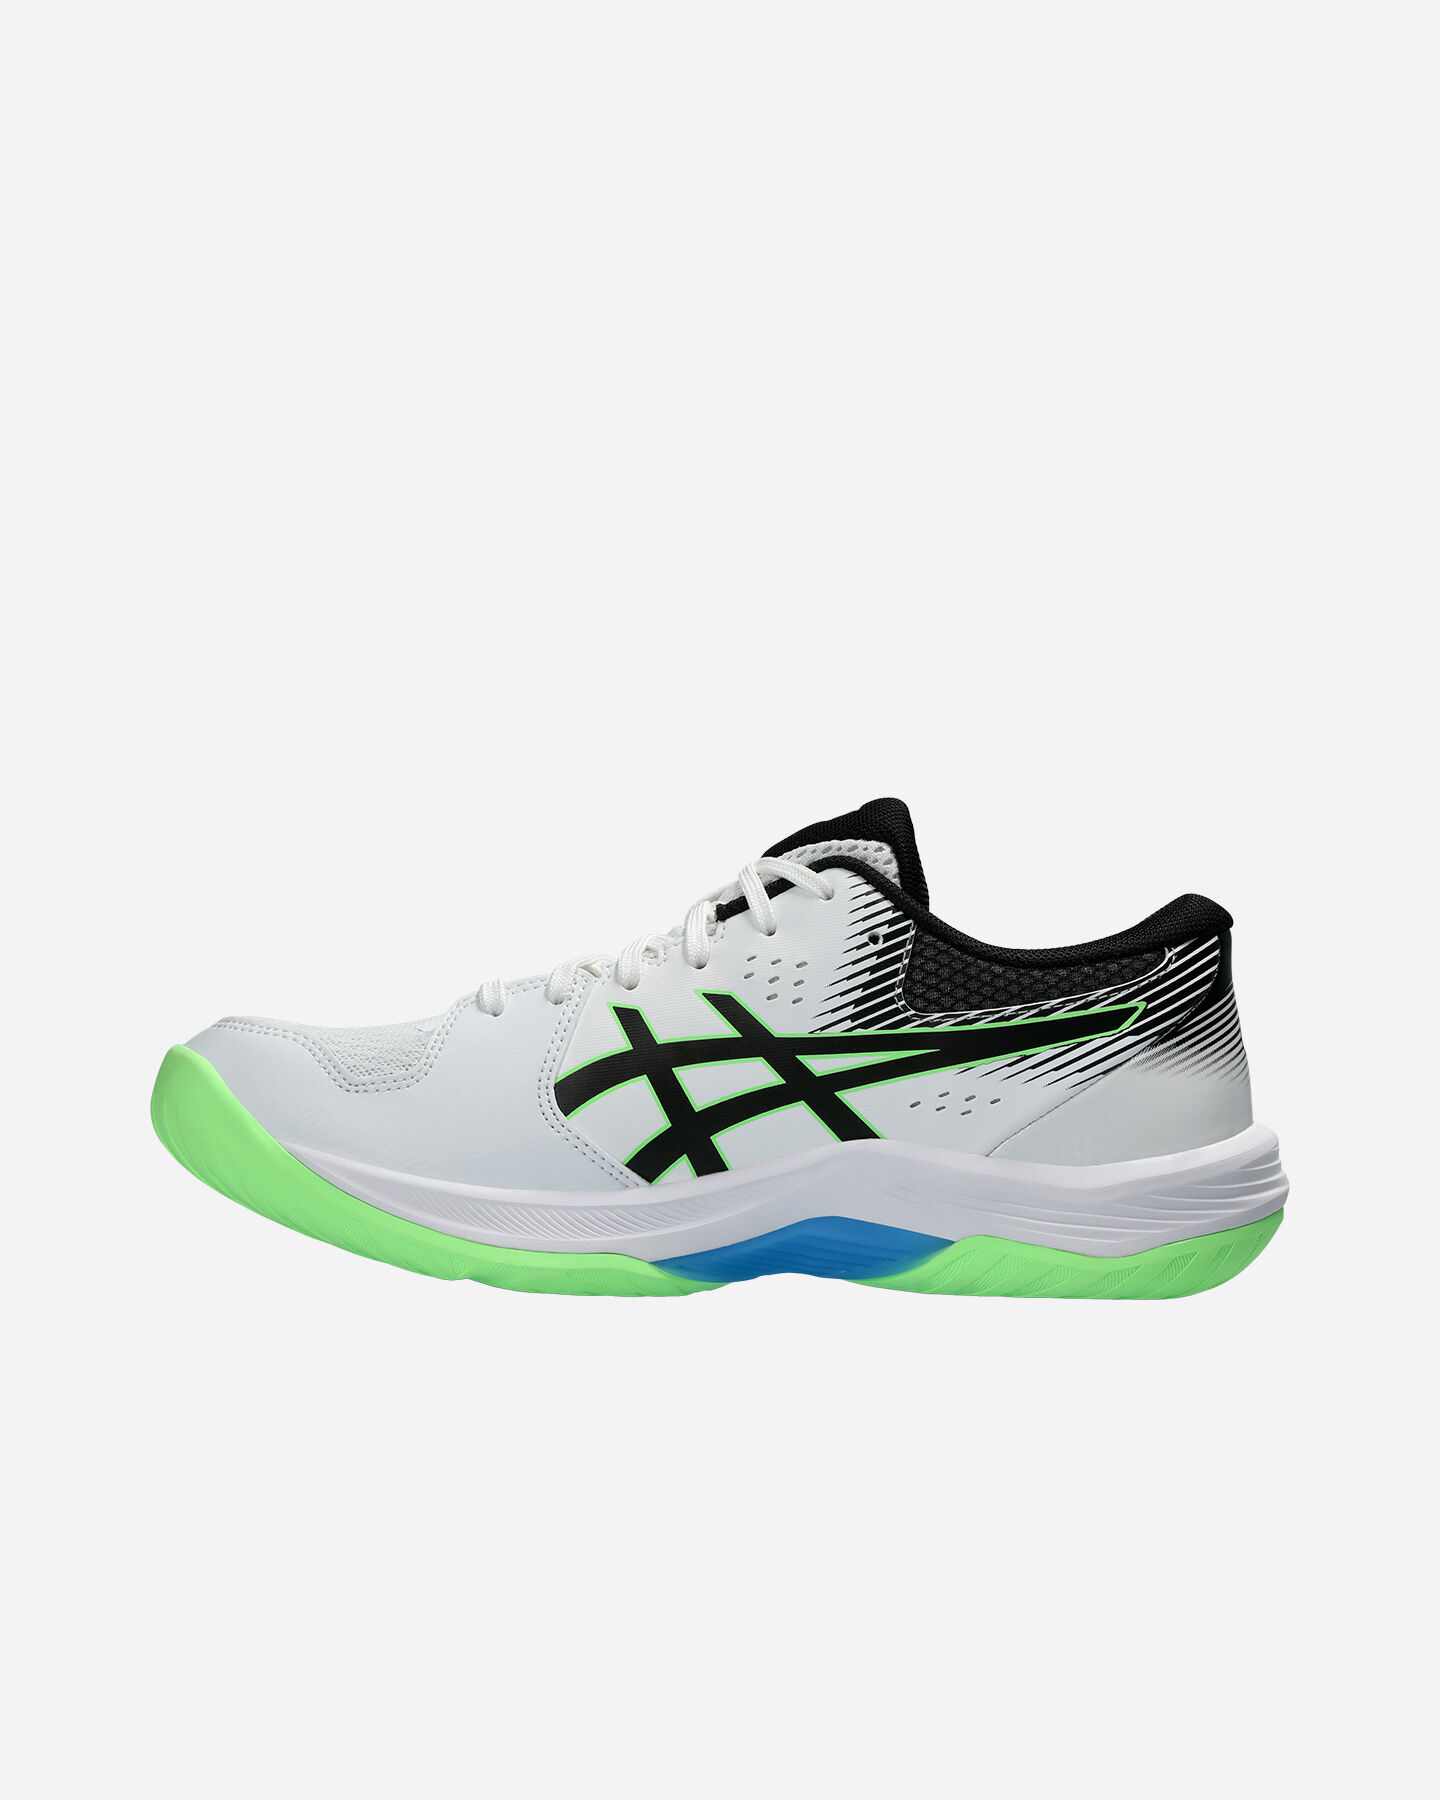  Scarpe volley ASICS BEYOND FF M S5643085|101|7H scatto 5